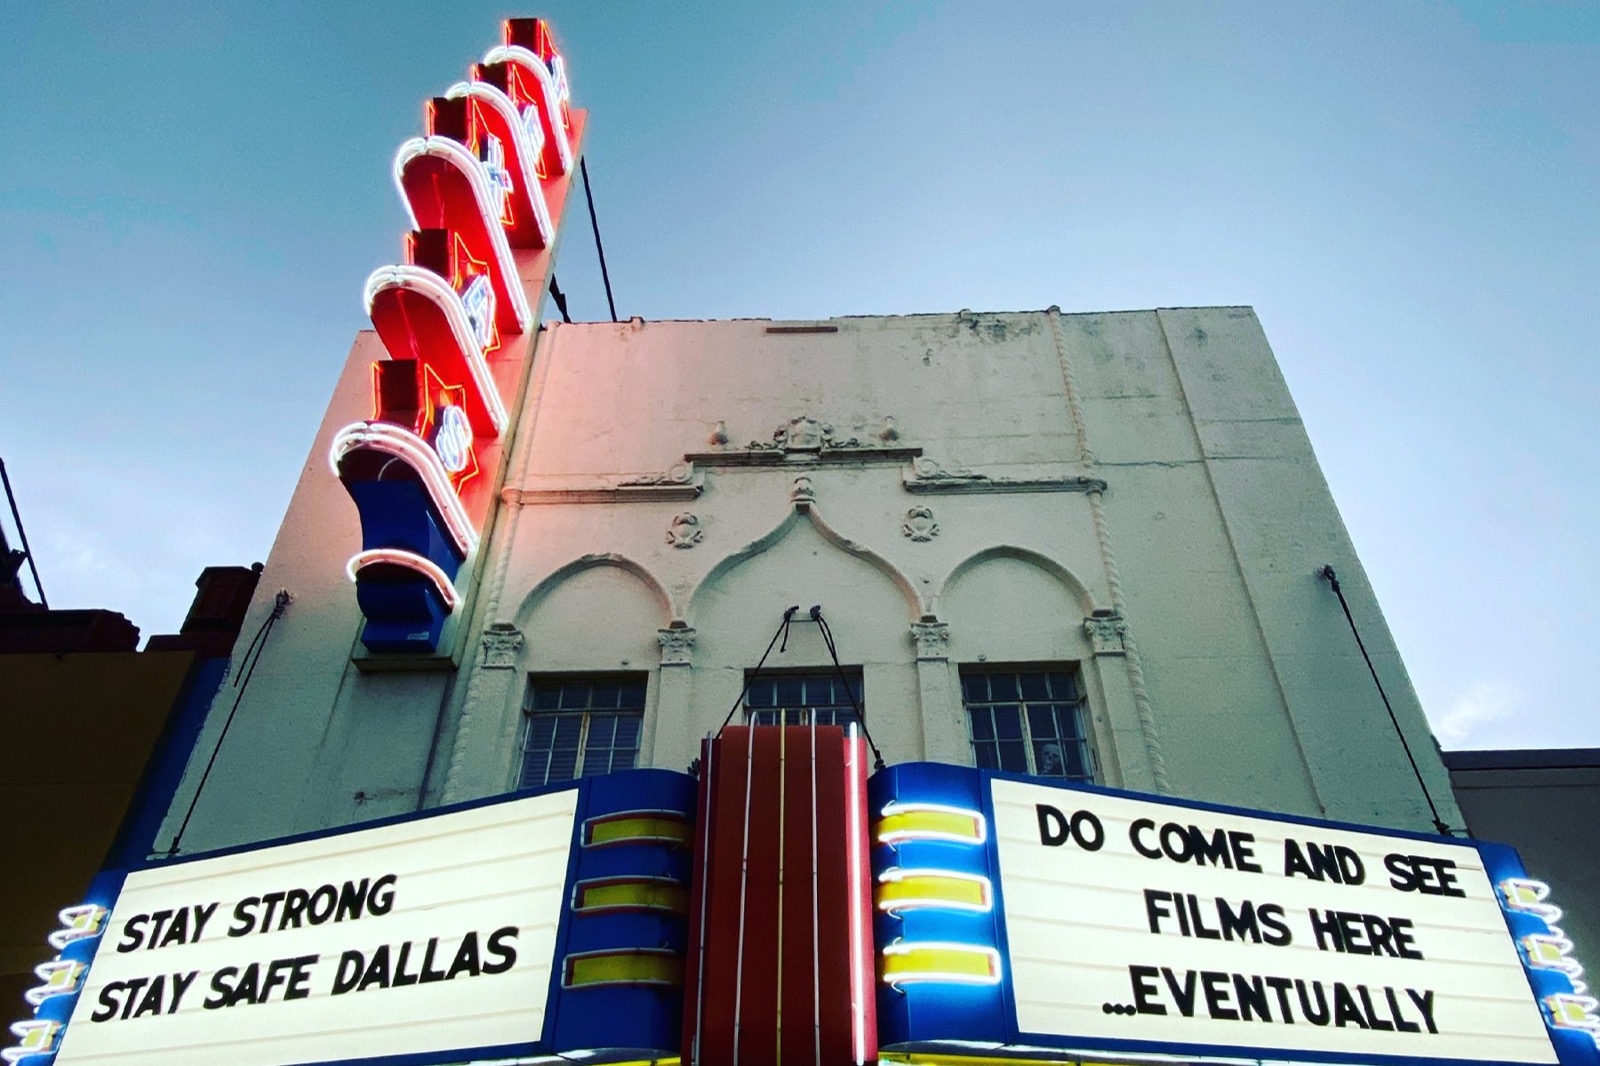 I’ll Be Impressed If You Score 11/15 on This General Knowledge Quiz (feat. JFK) Texas Theater, Dallas